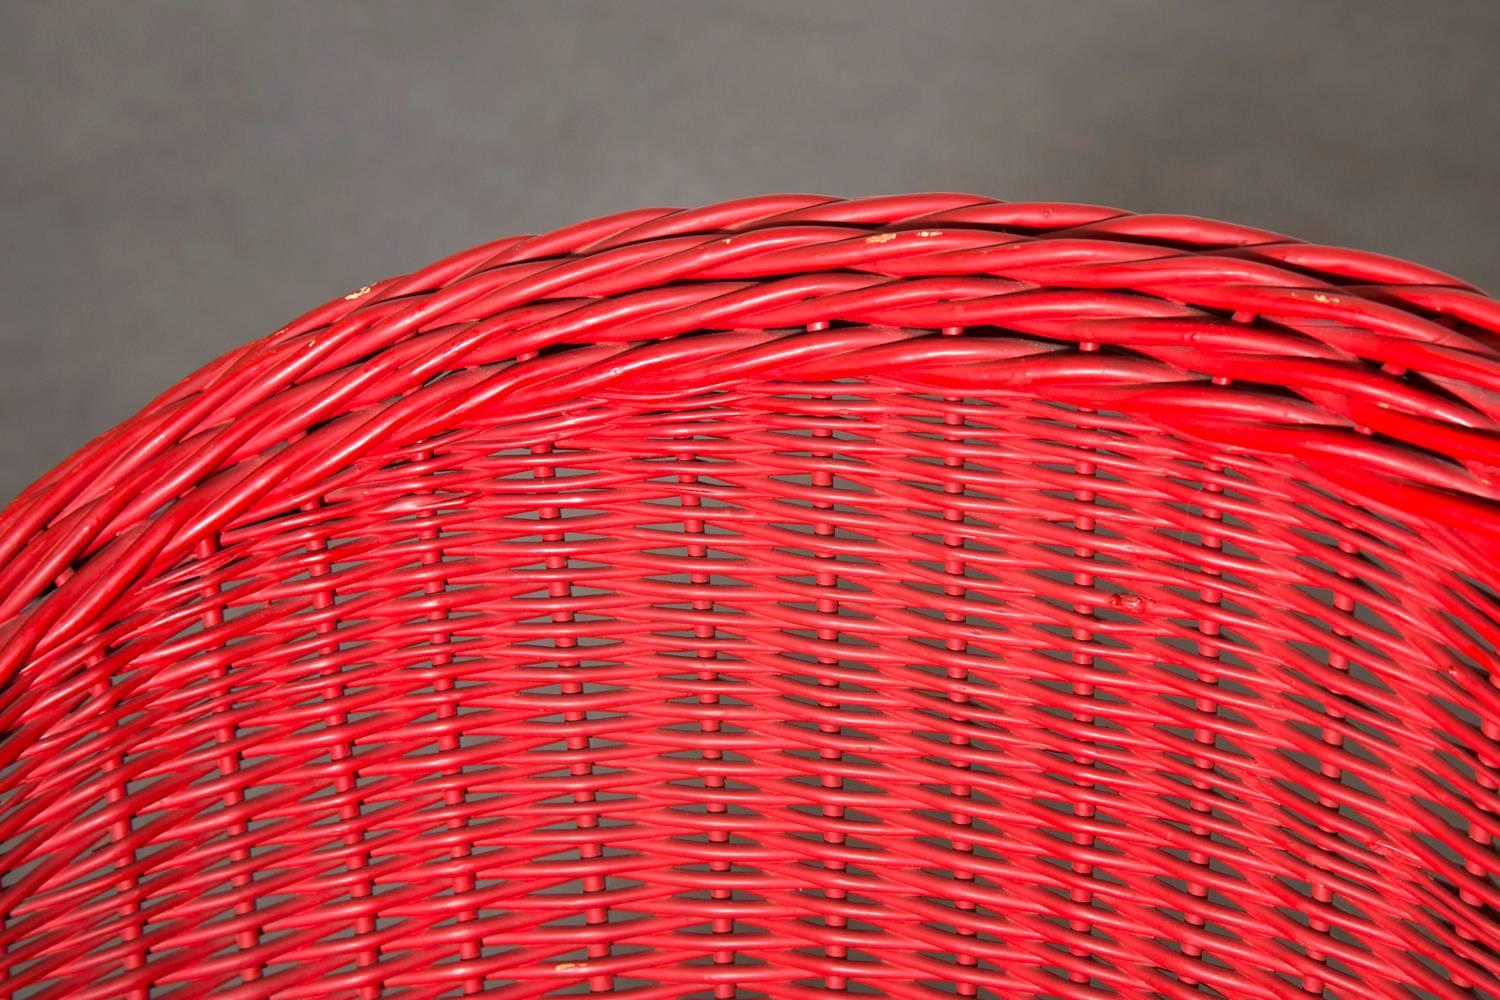 Mid-Century Modern Jacques Adnet Inspired Red Woven Rattan and Wire Hoop Chair For Sale